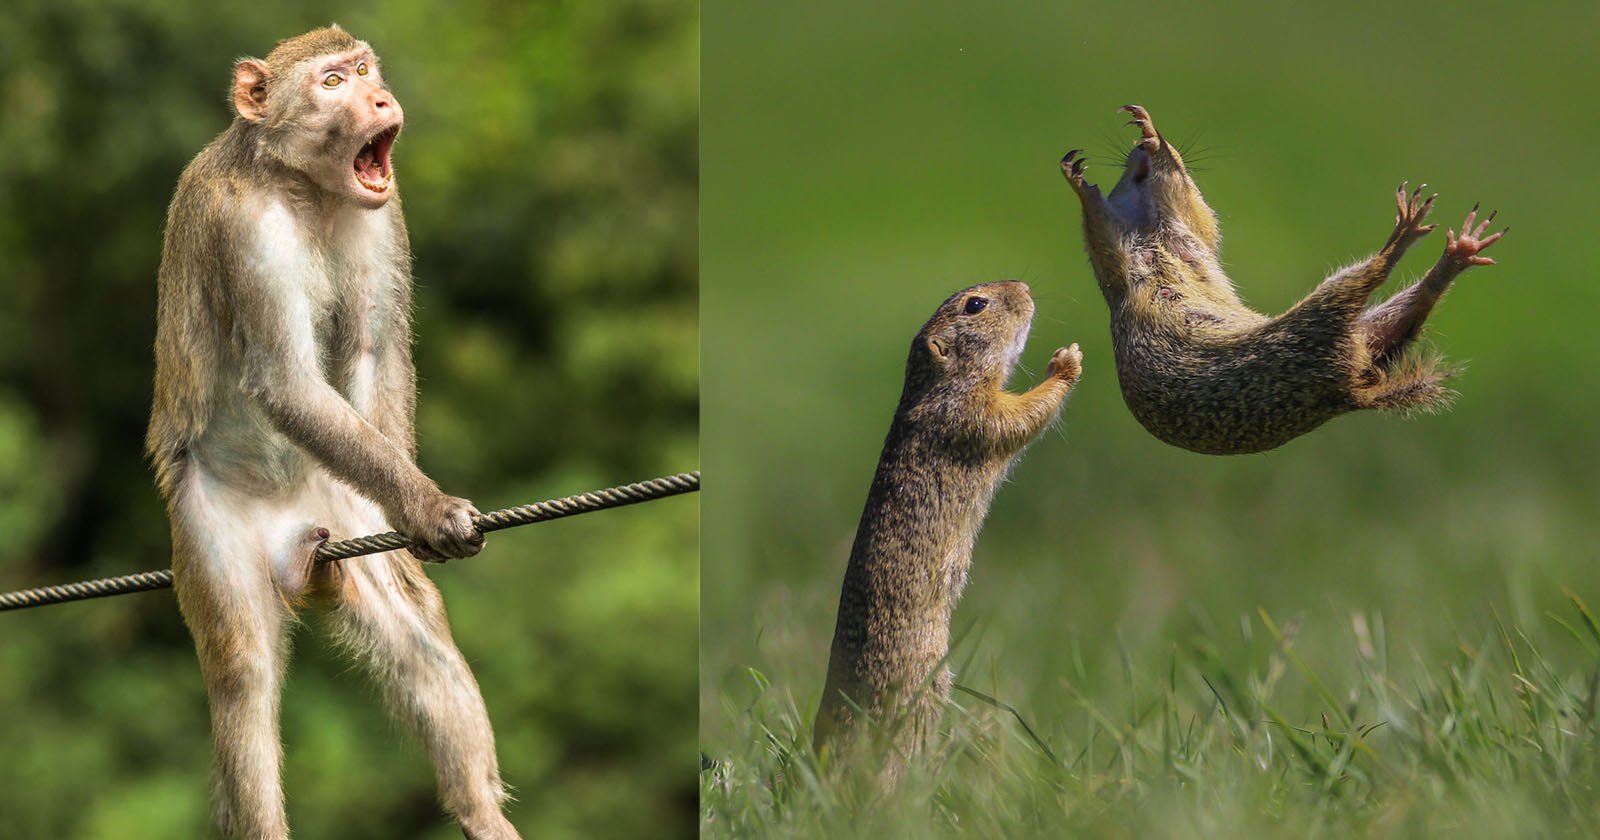 23 of the Funniest Finalists in the 2021 Comedy Wildlife Photo Awards |  PetaPixel